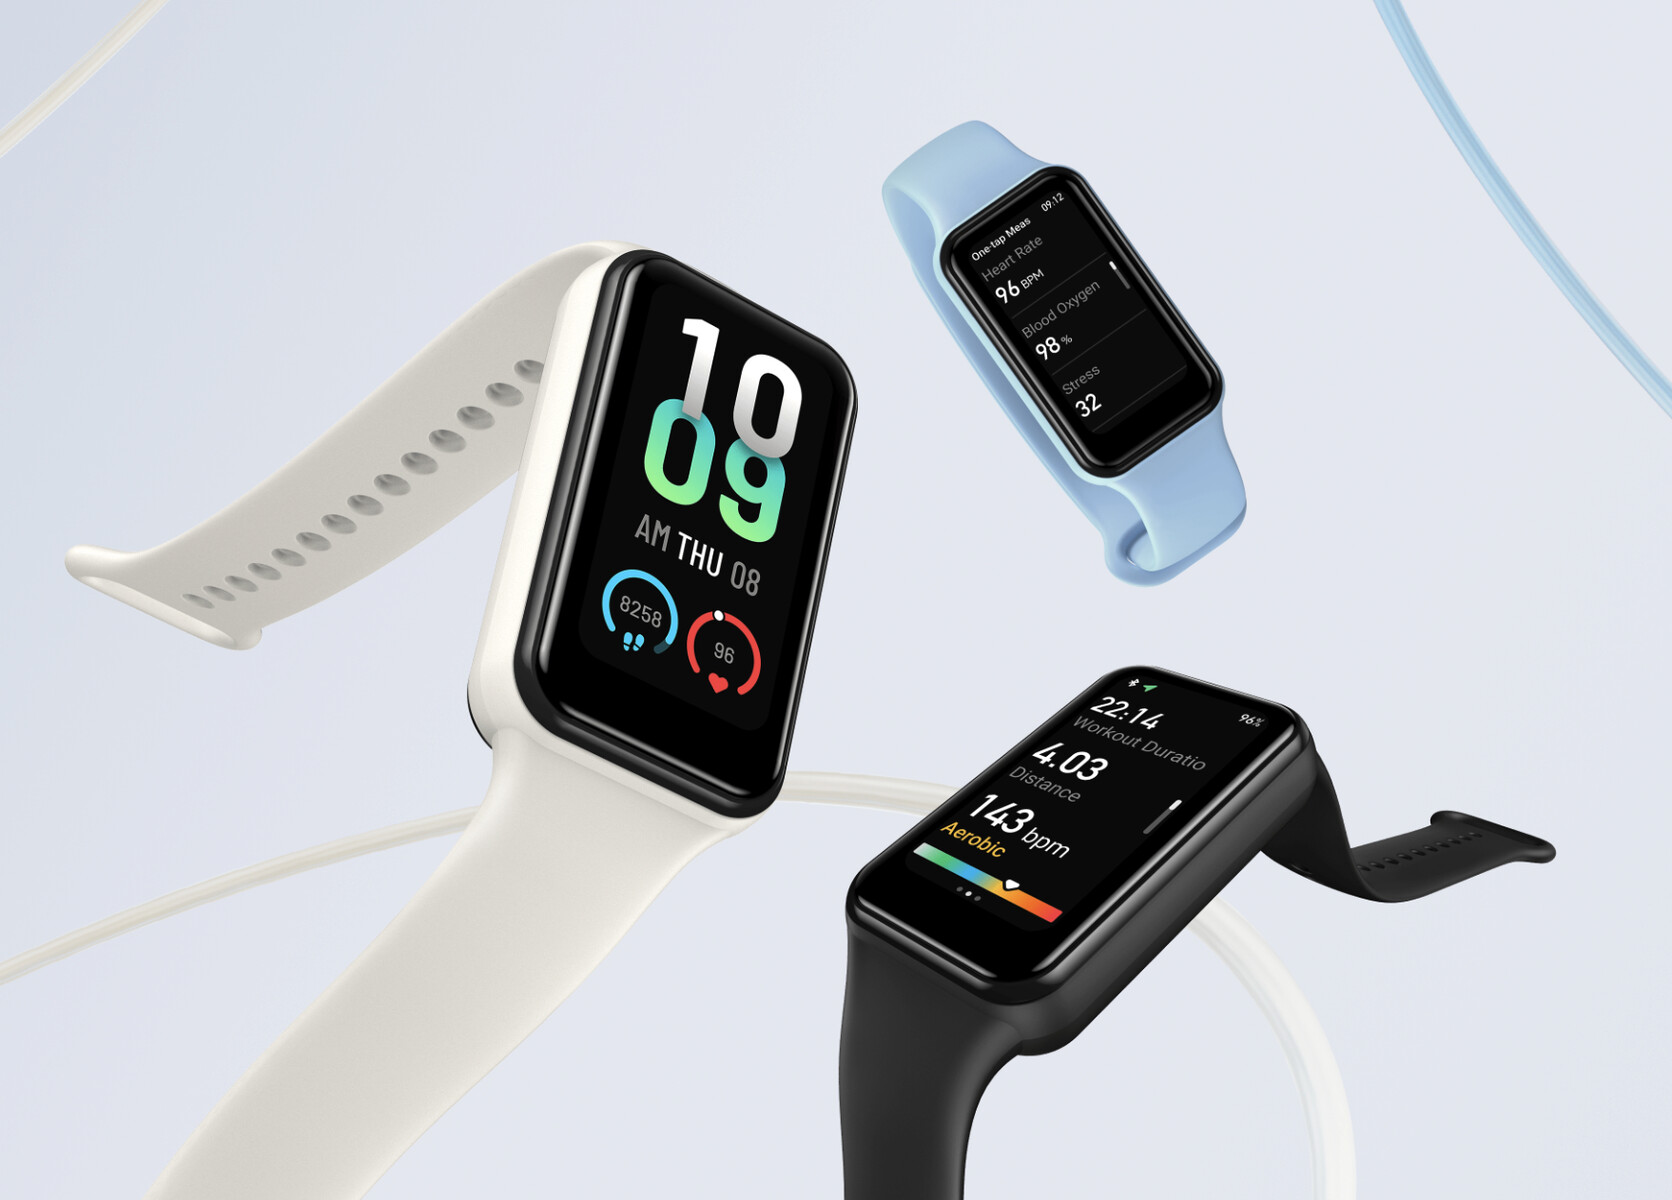 Amazfit Bip 3 and 3 Pro become official from just US$60 -   News